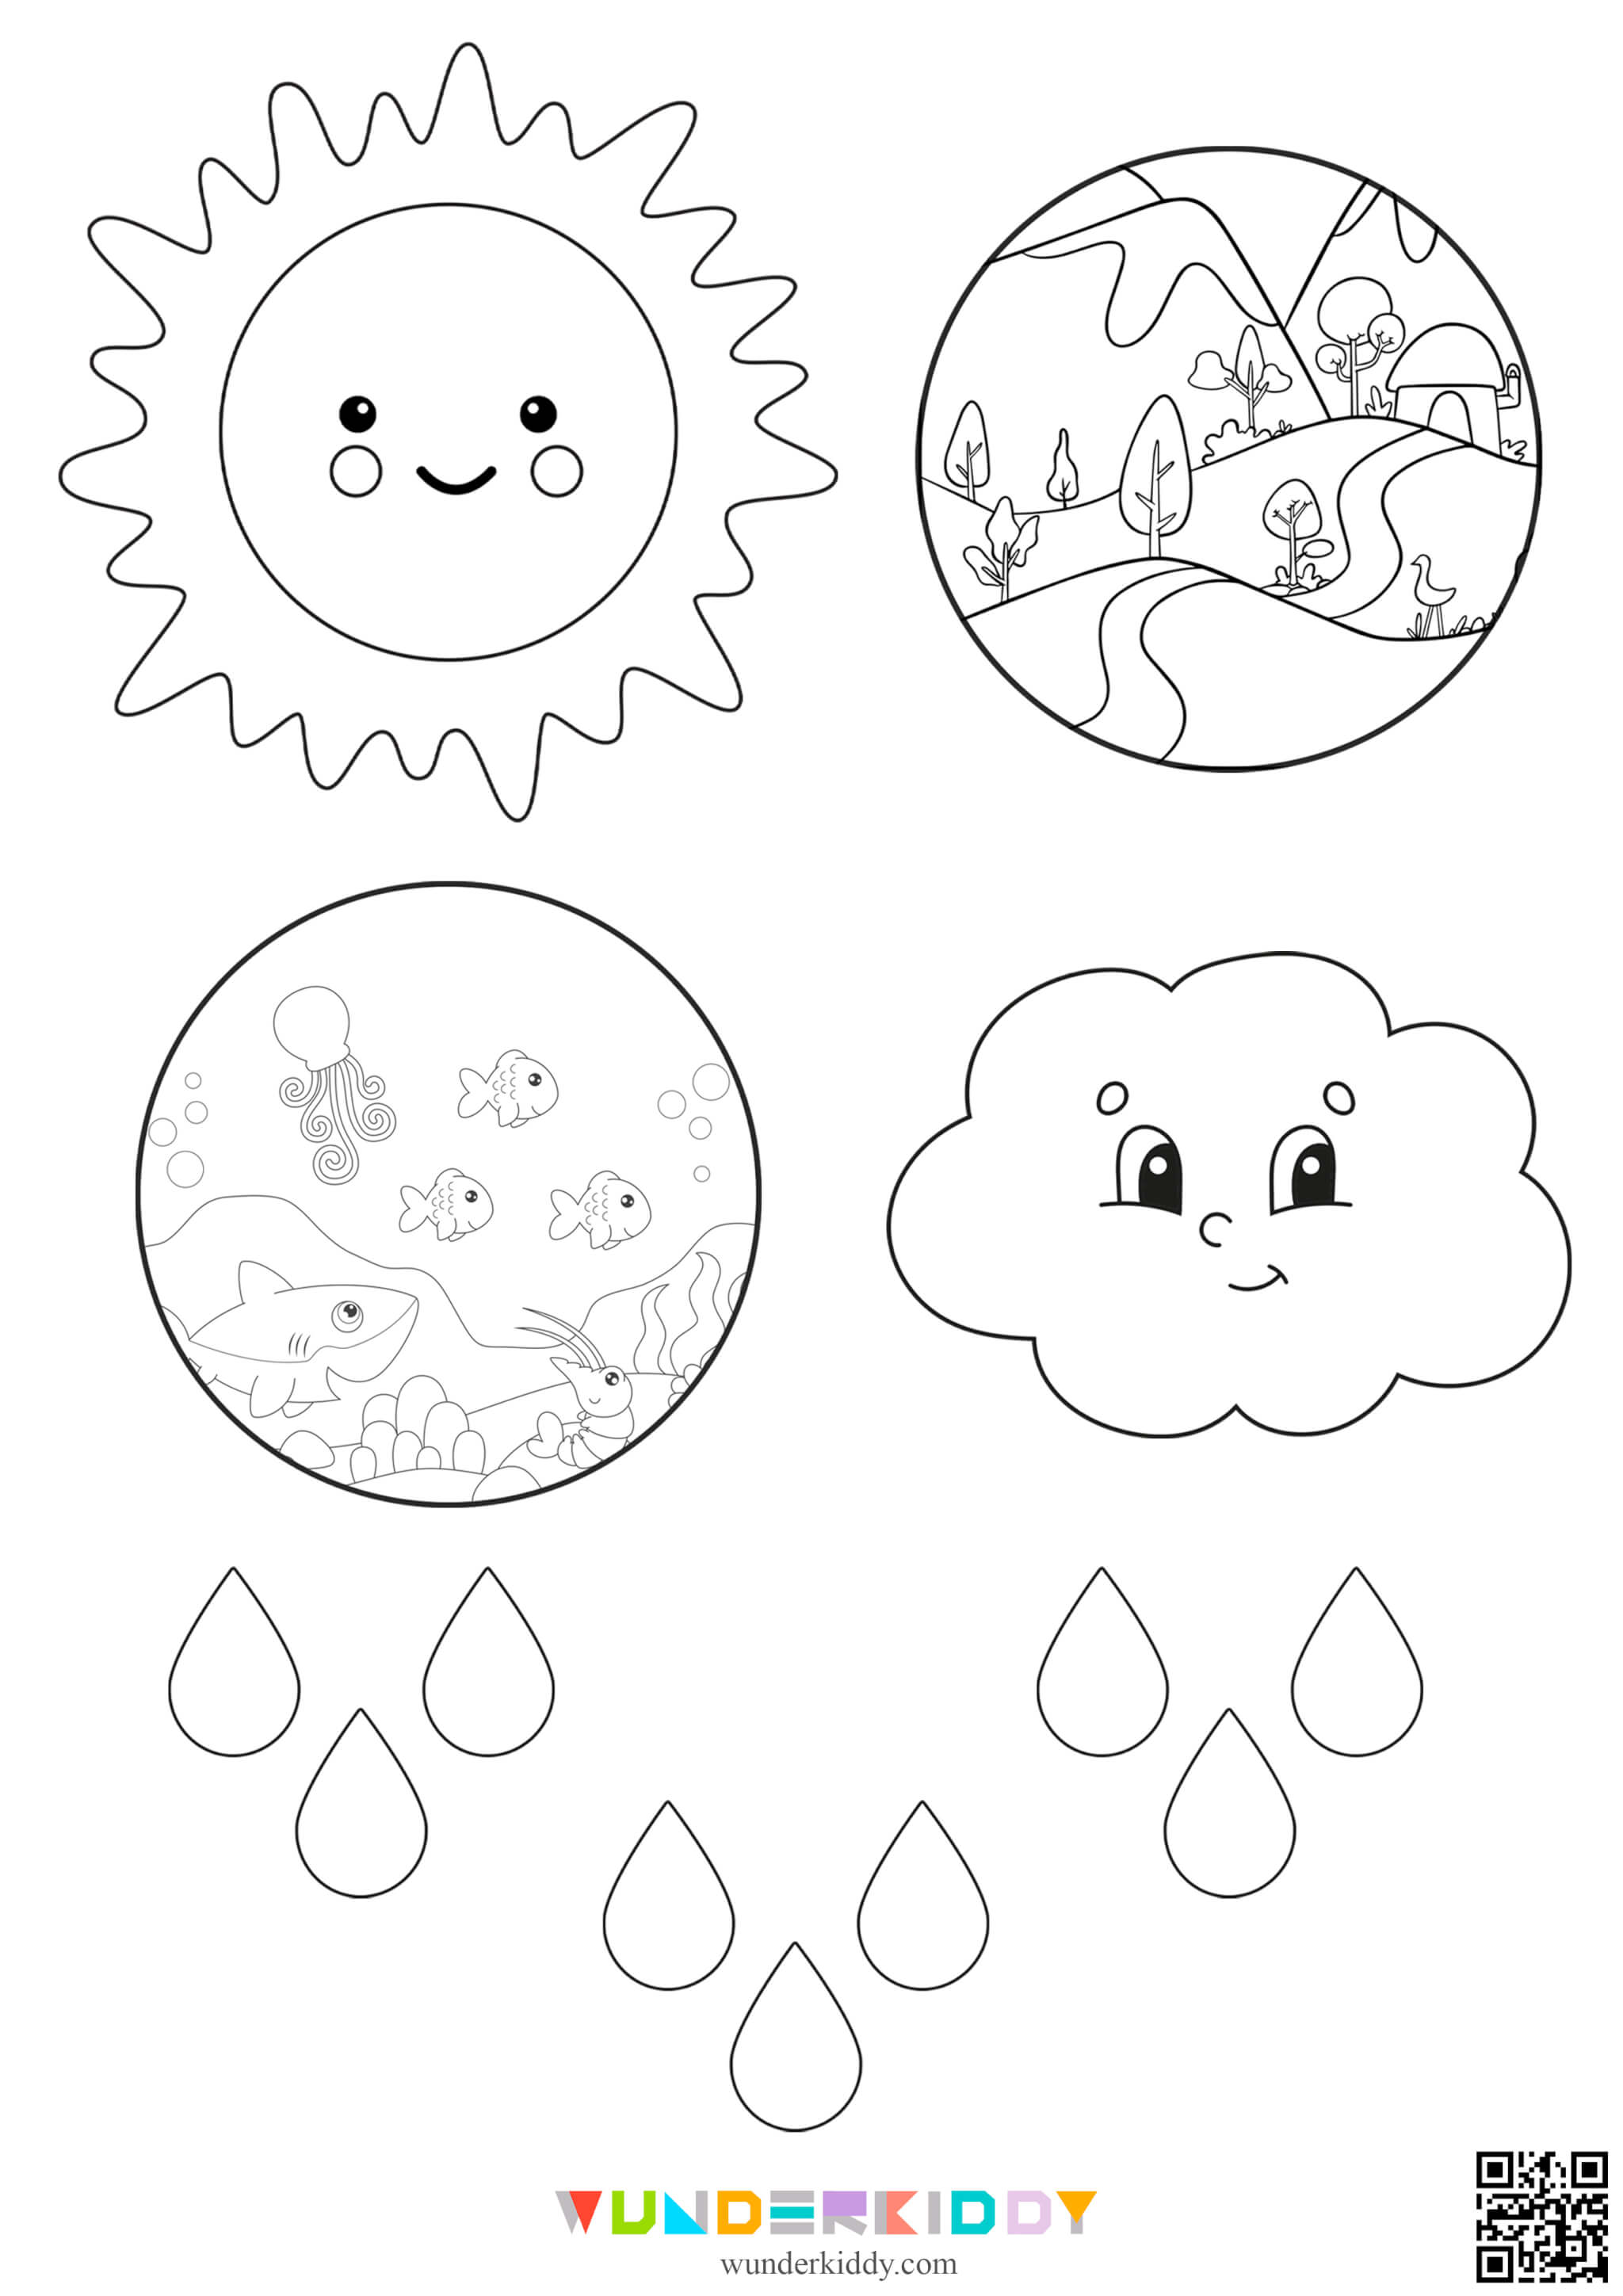 Free Water Cycle Craft Template - Image 5